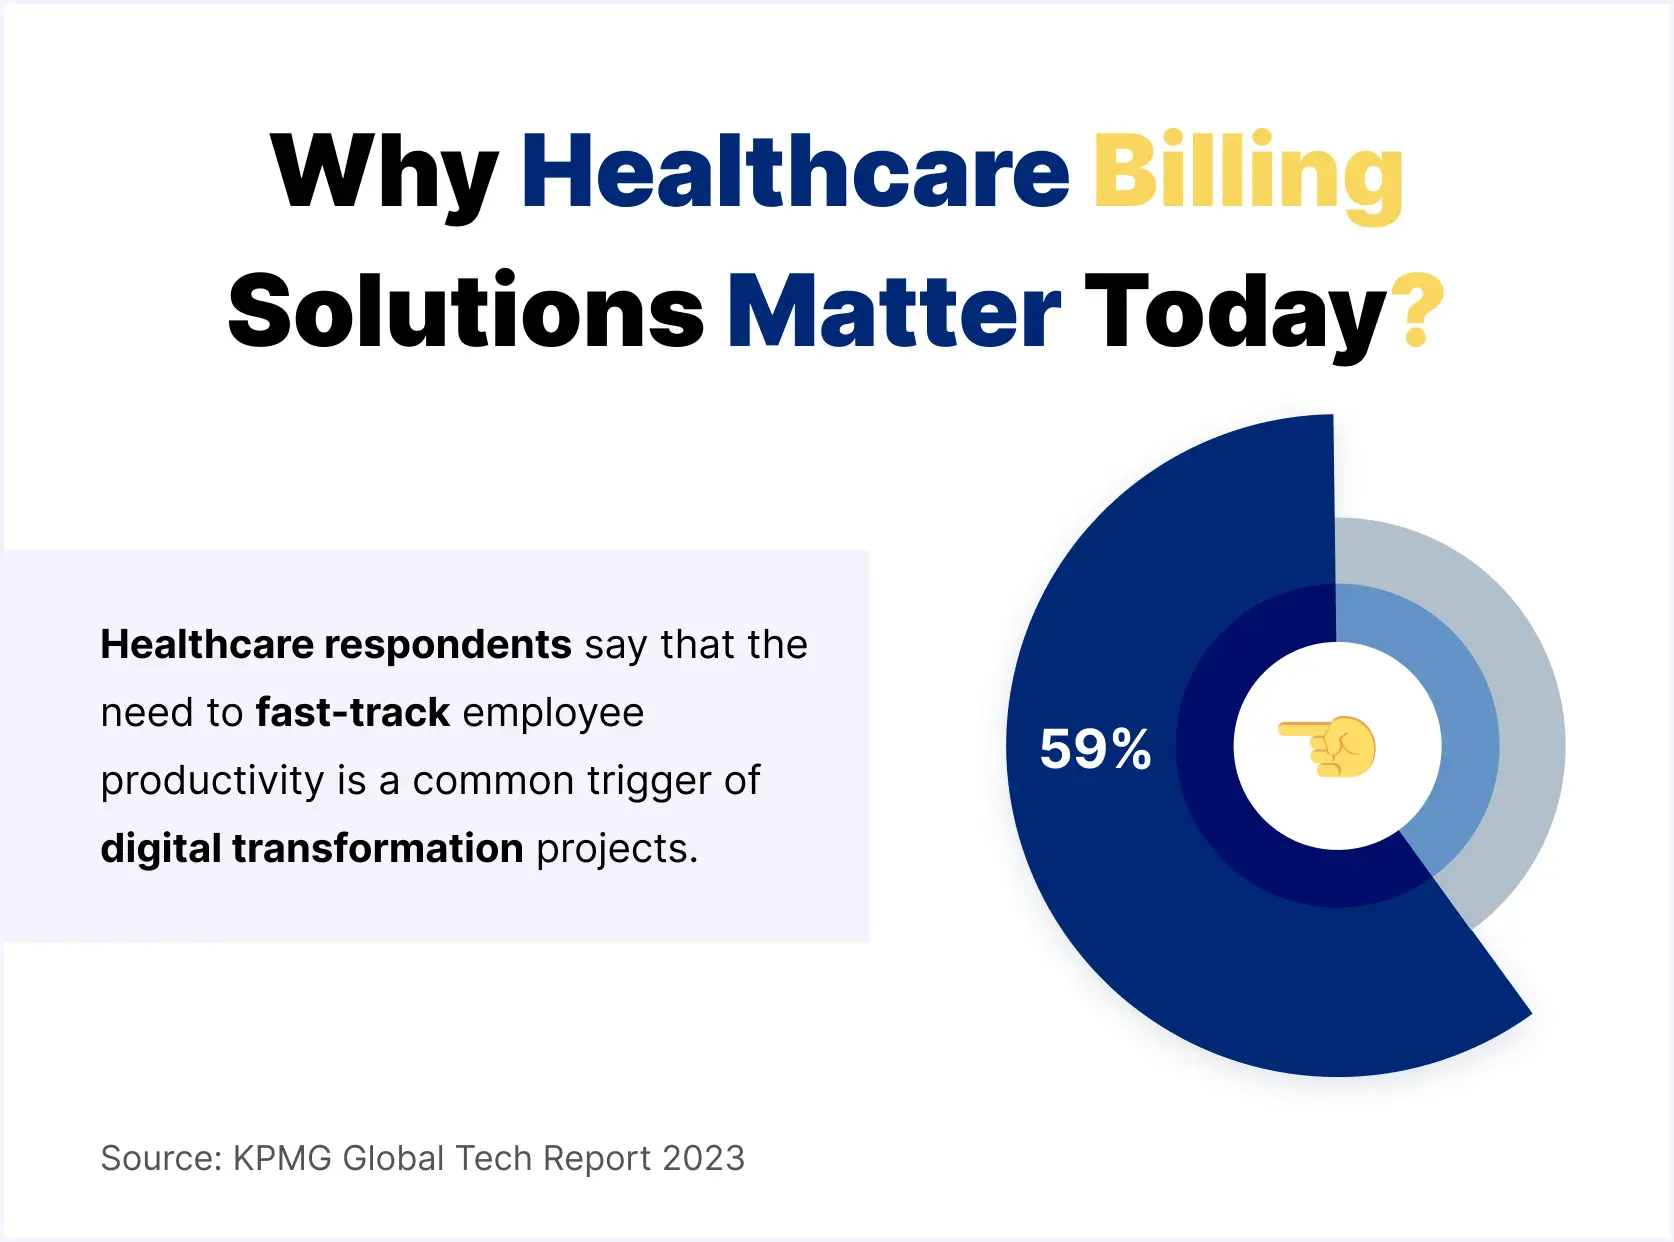 Why Healthcare Billing Solutions Matter Today